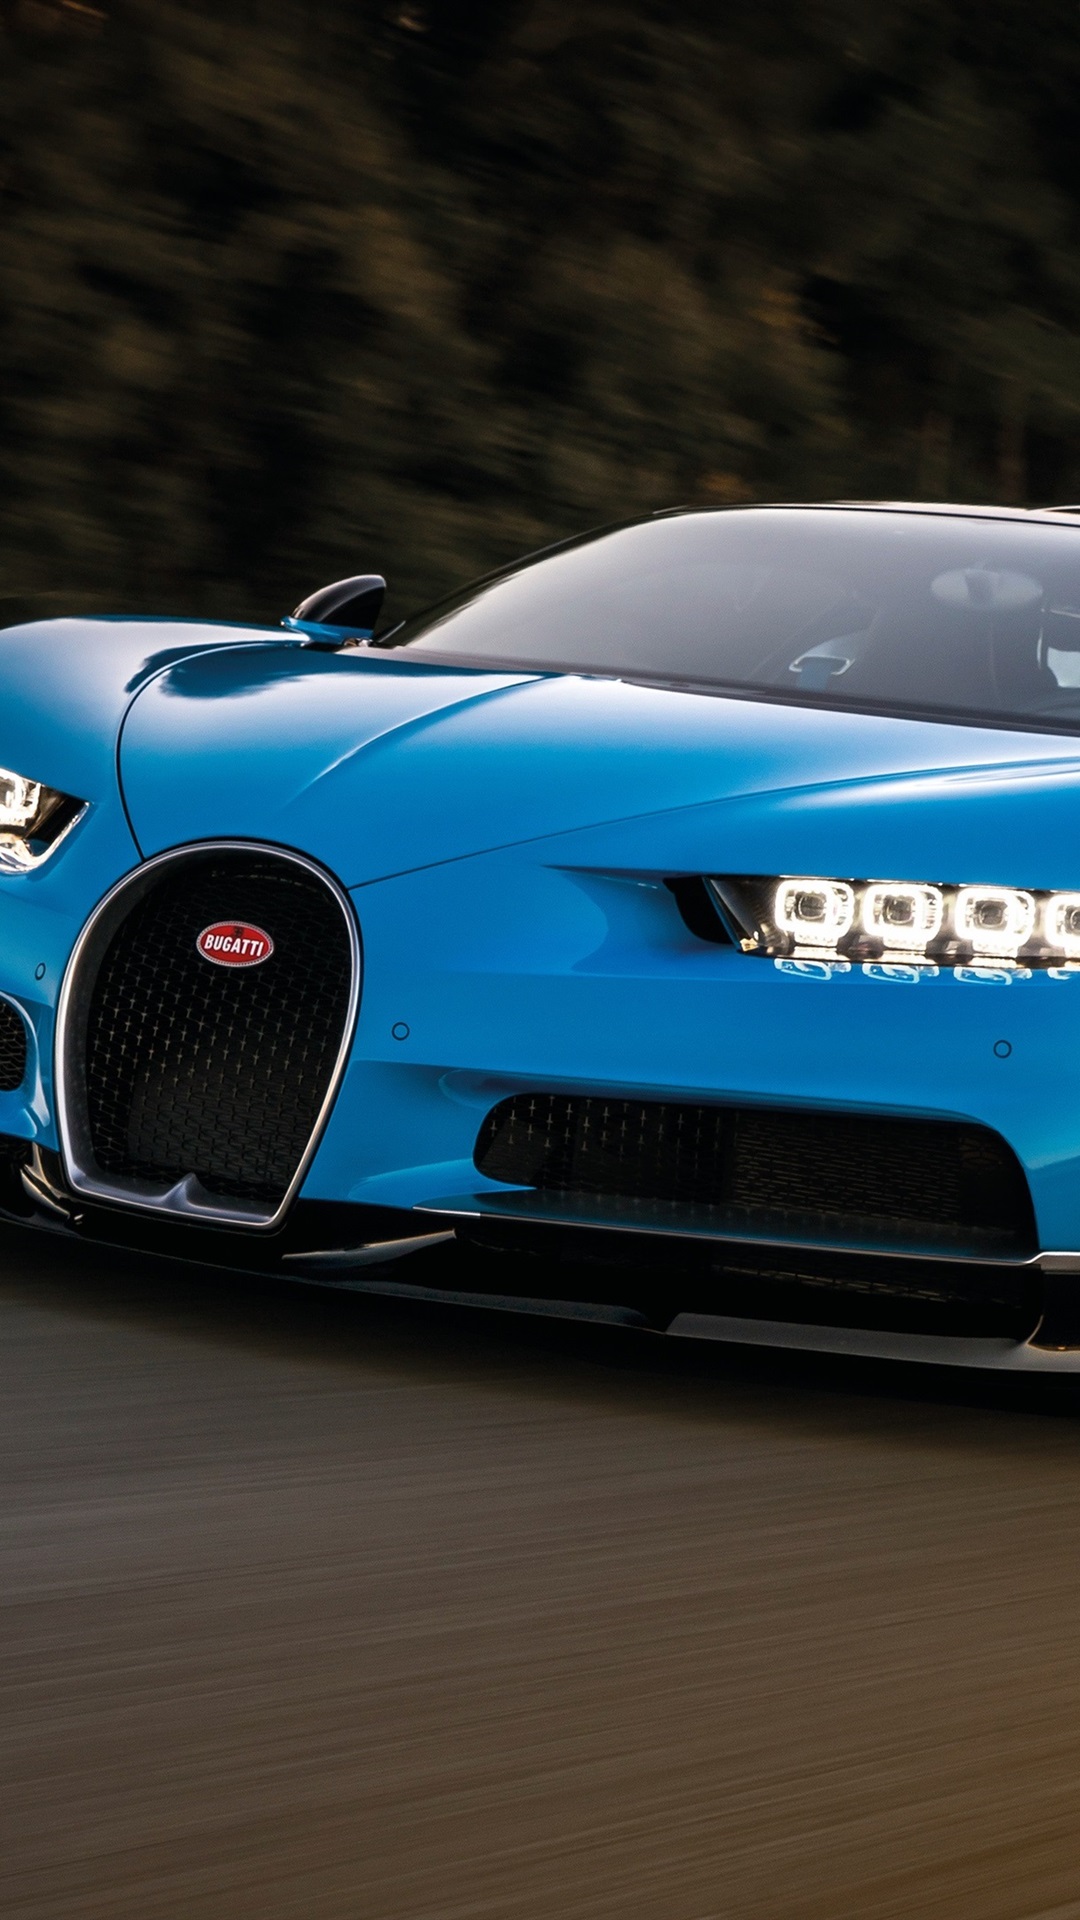 Blue bugatti chiron supercar speed x iphone s plus wallpaper background picture image